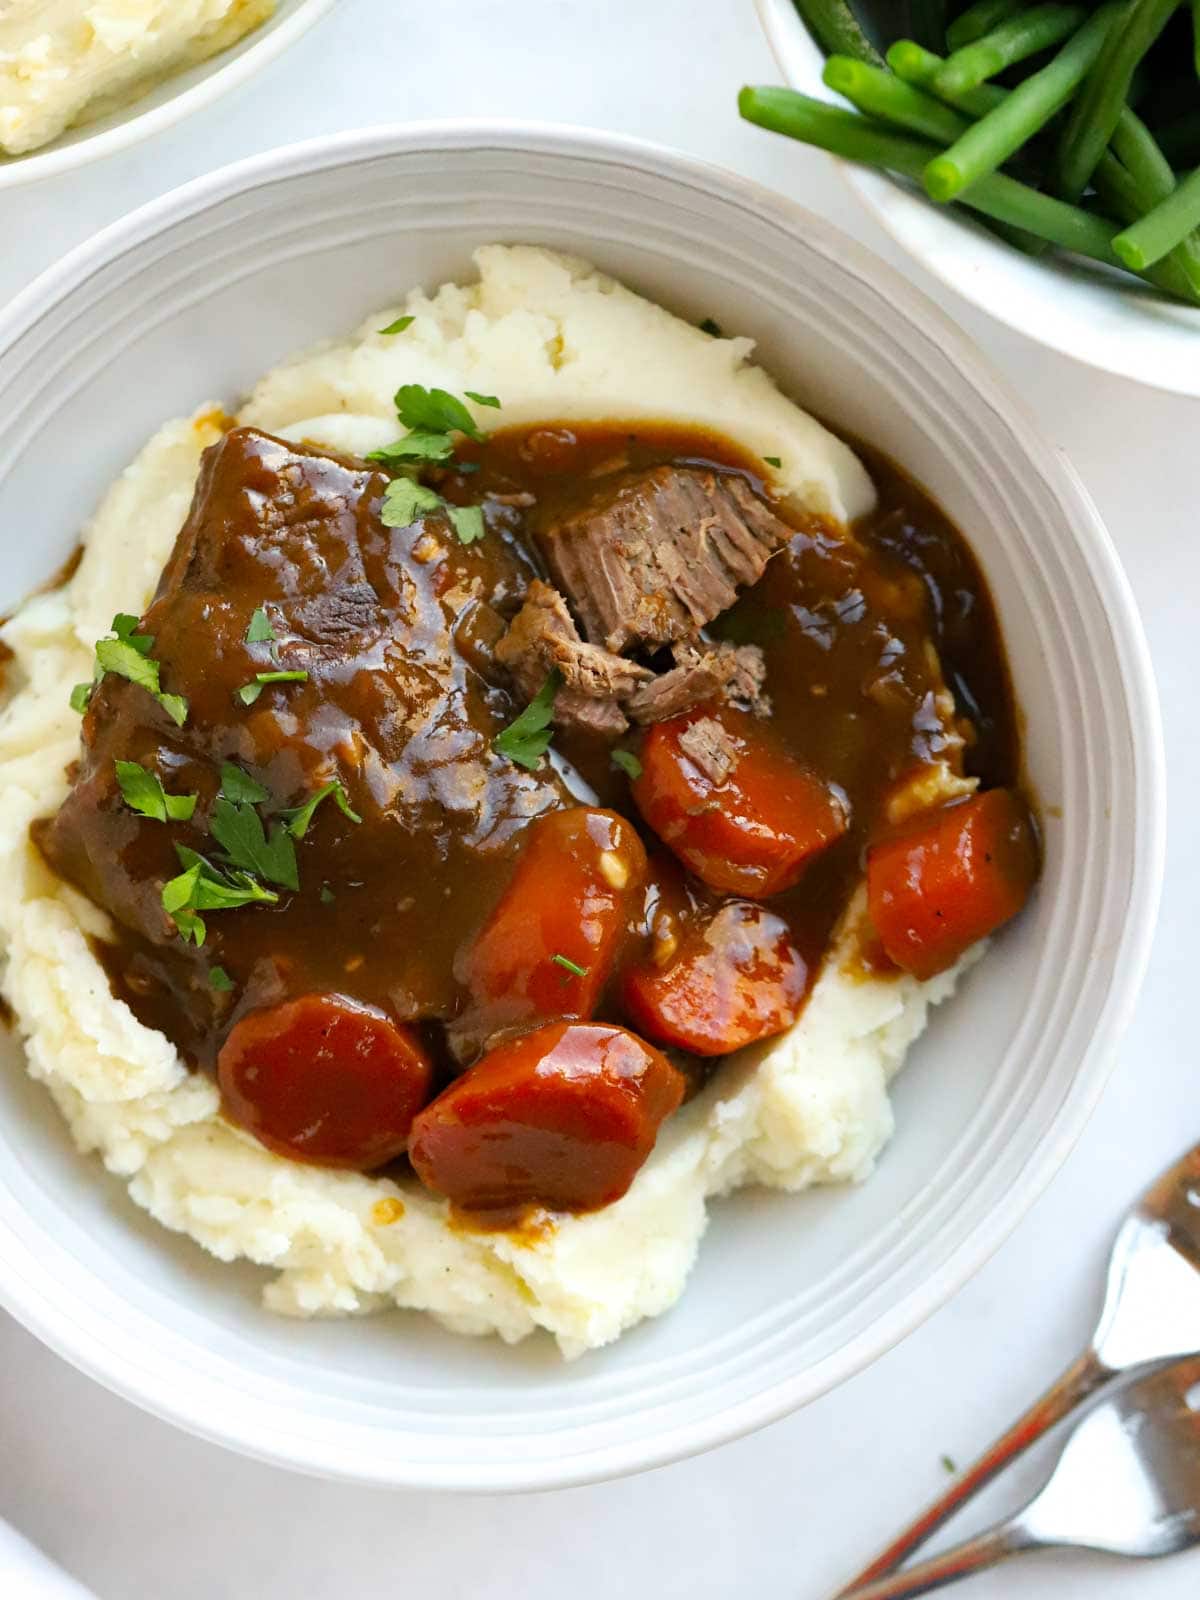 A bowl of homemade braised steak with carrots on a bed of mashed potato.